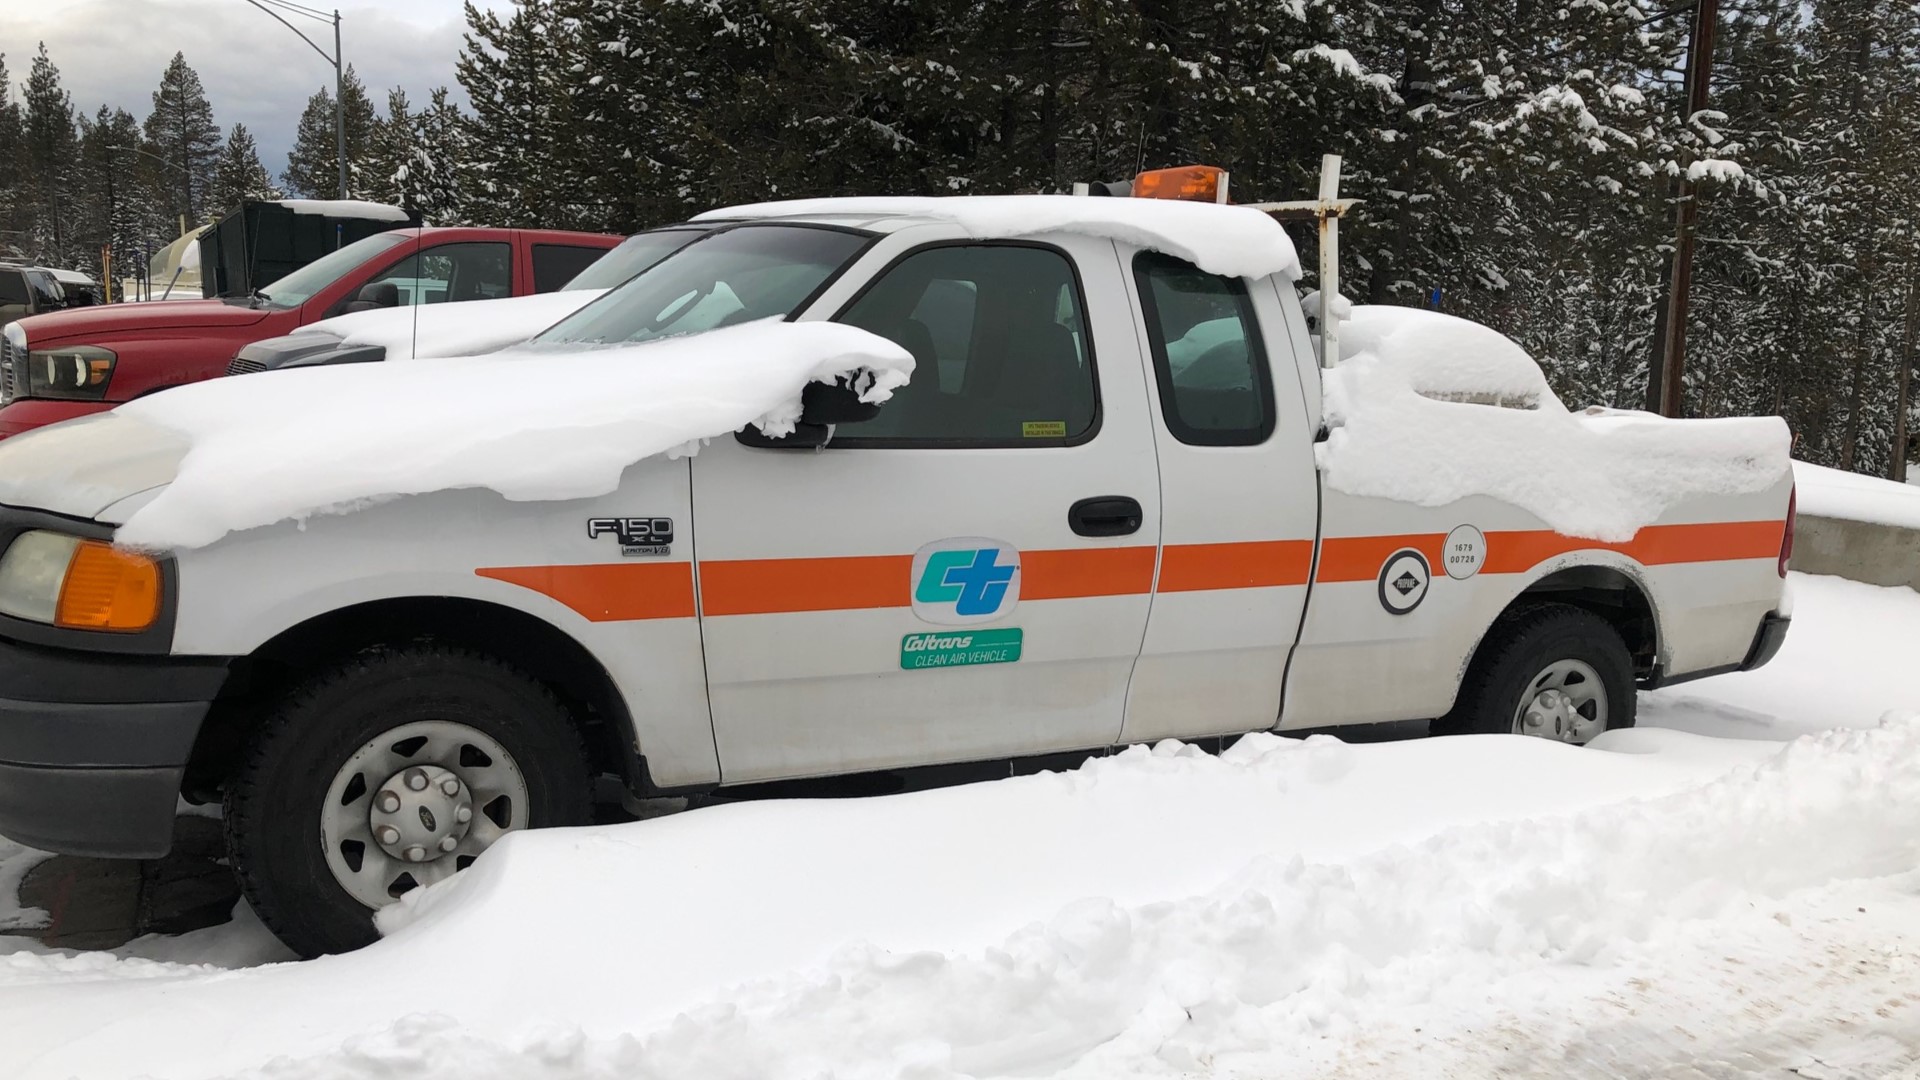 Caltrans officials are issuing a serious warning to drivers as the biggest storm of 2020, so far, is set to hit the Sierra Nevada on Thursday.